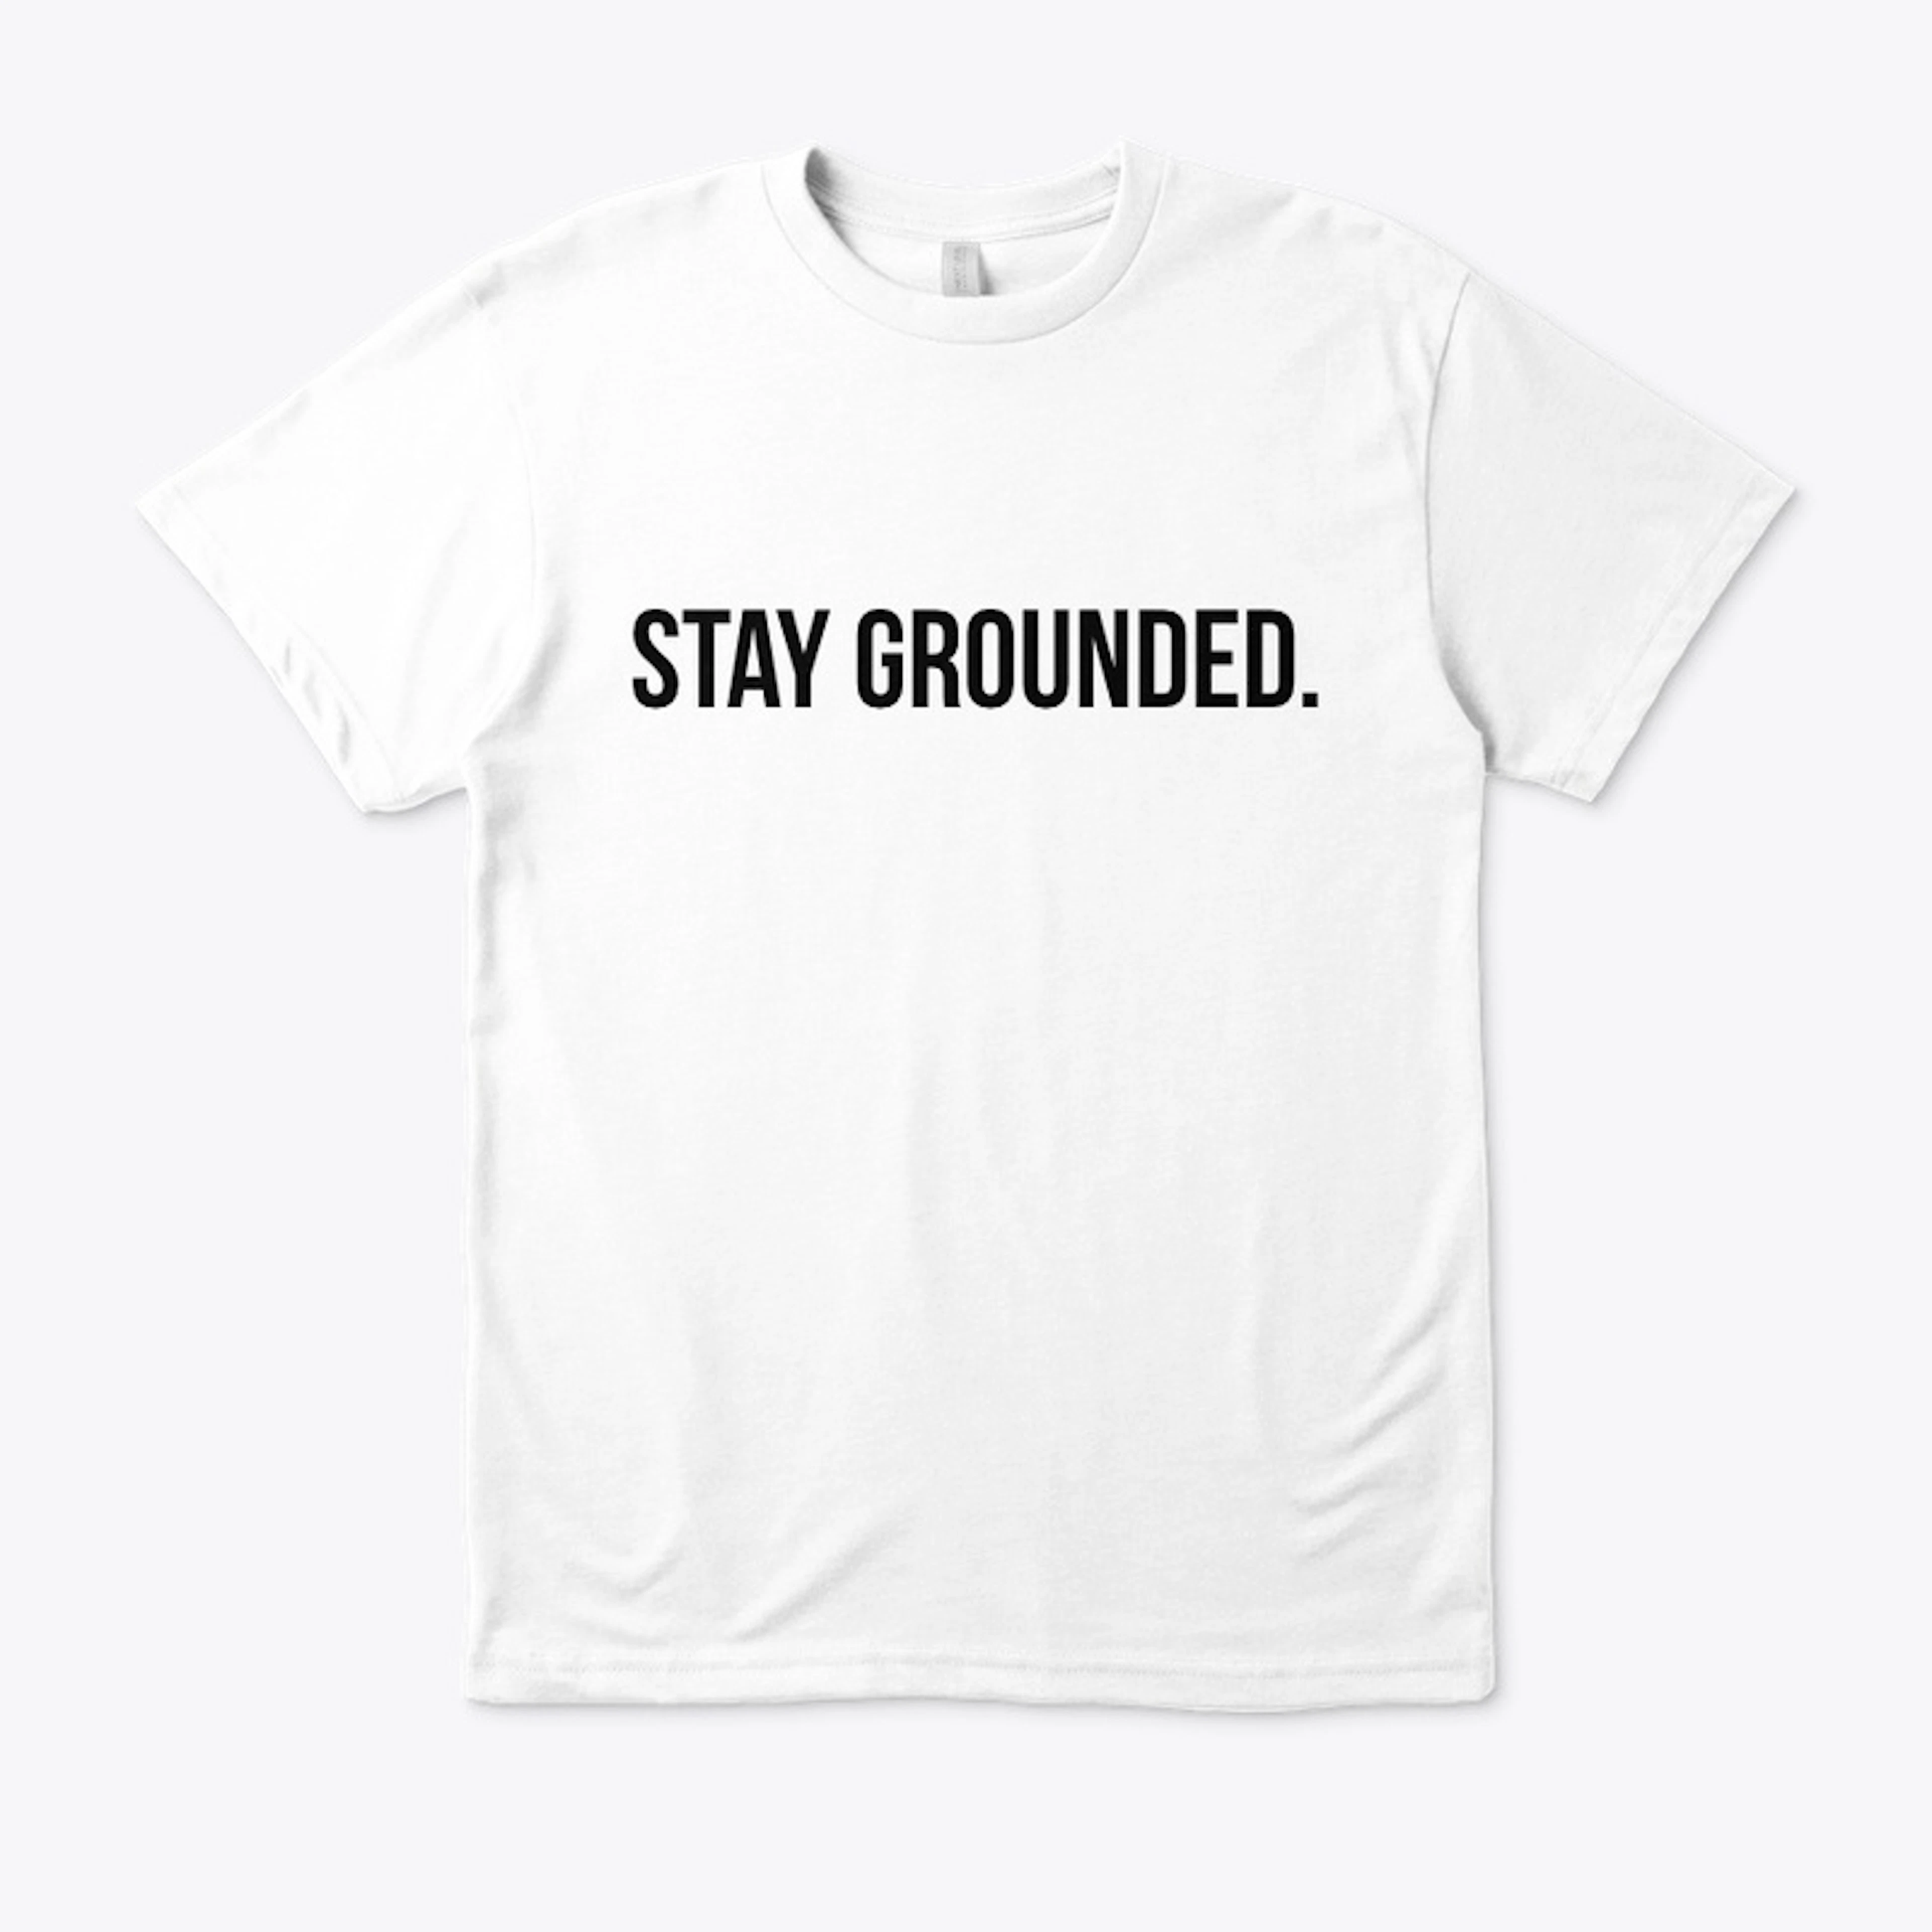 STAY GROUNDED.